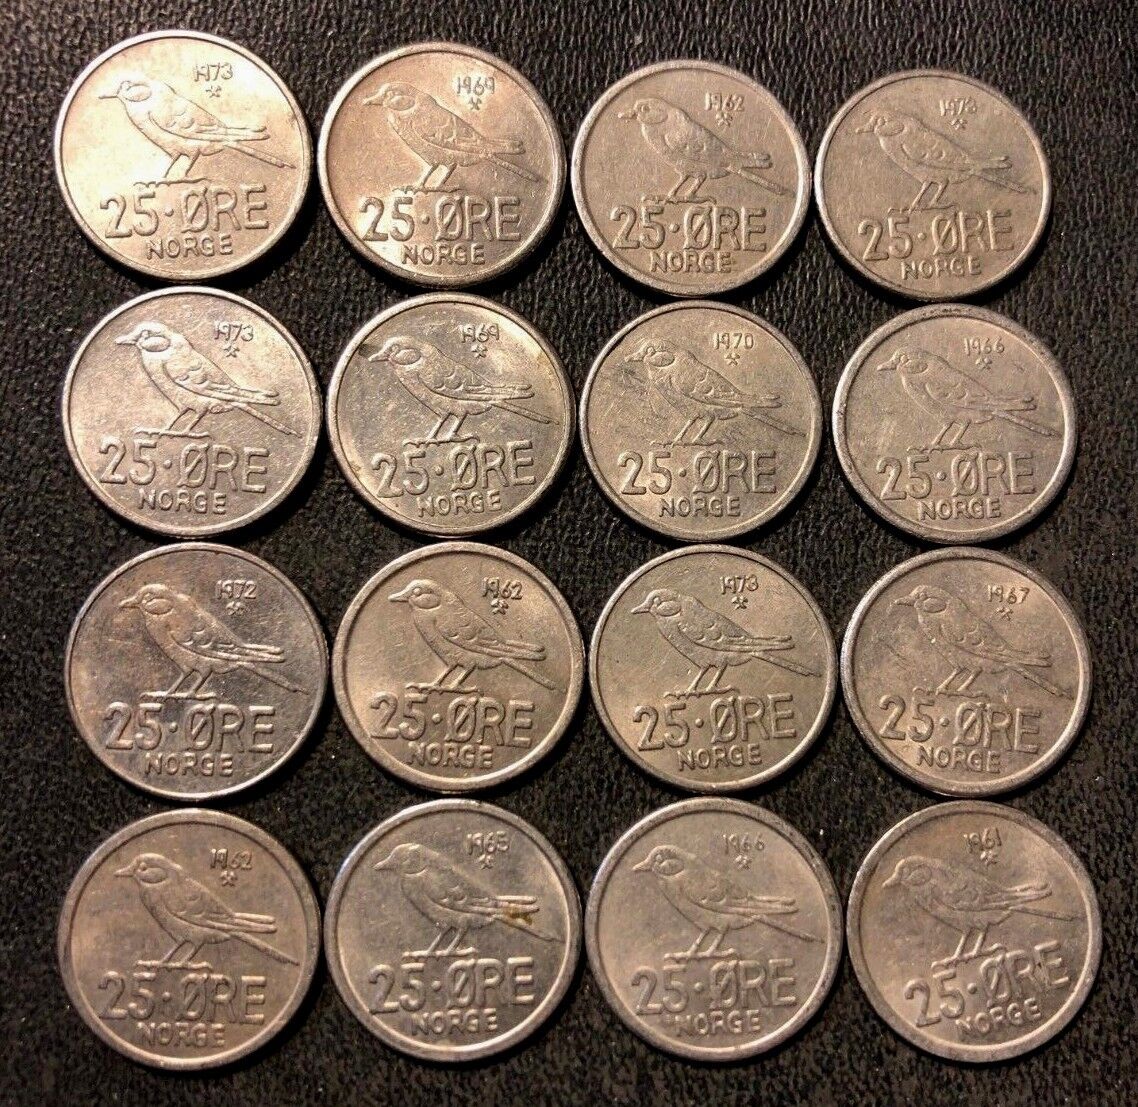 Vintage Norway Coin Lot - 25 Ore - Bird Series - 16 Uncommon Coins - Free Ship